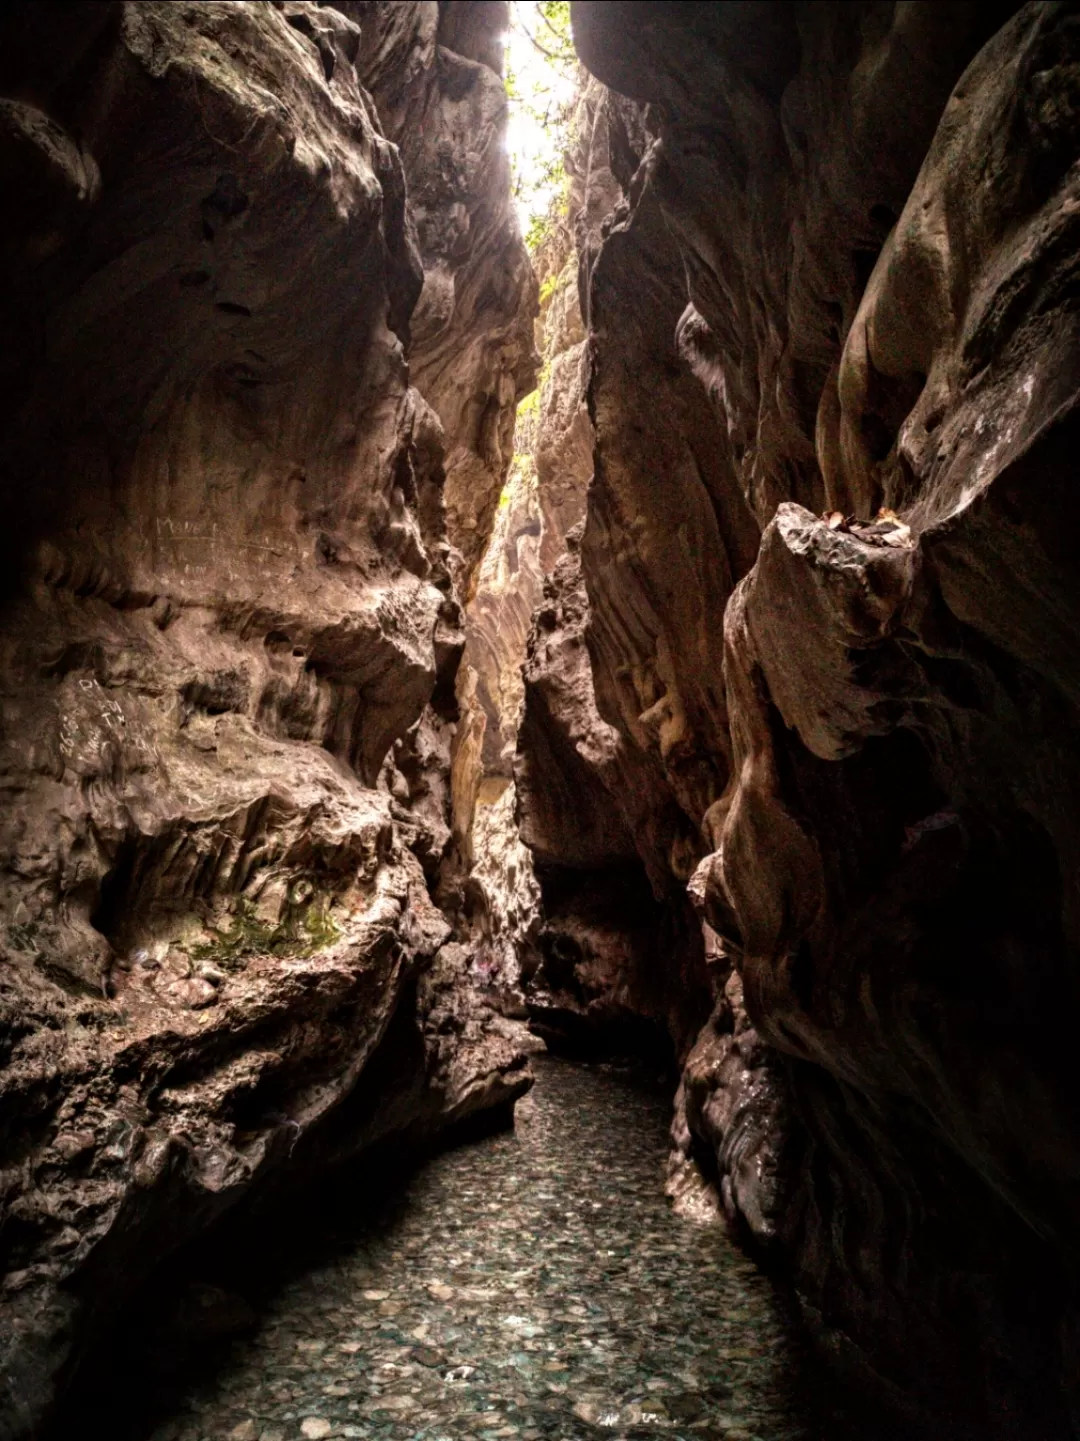 Photo of Robber's Cave By nishant jhamb